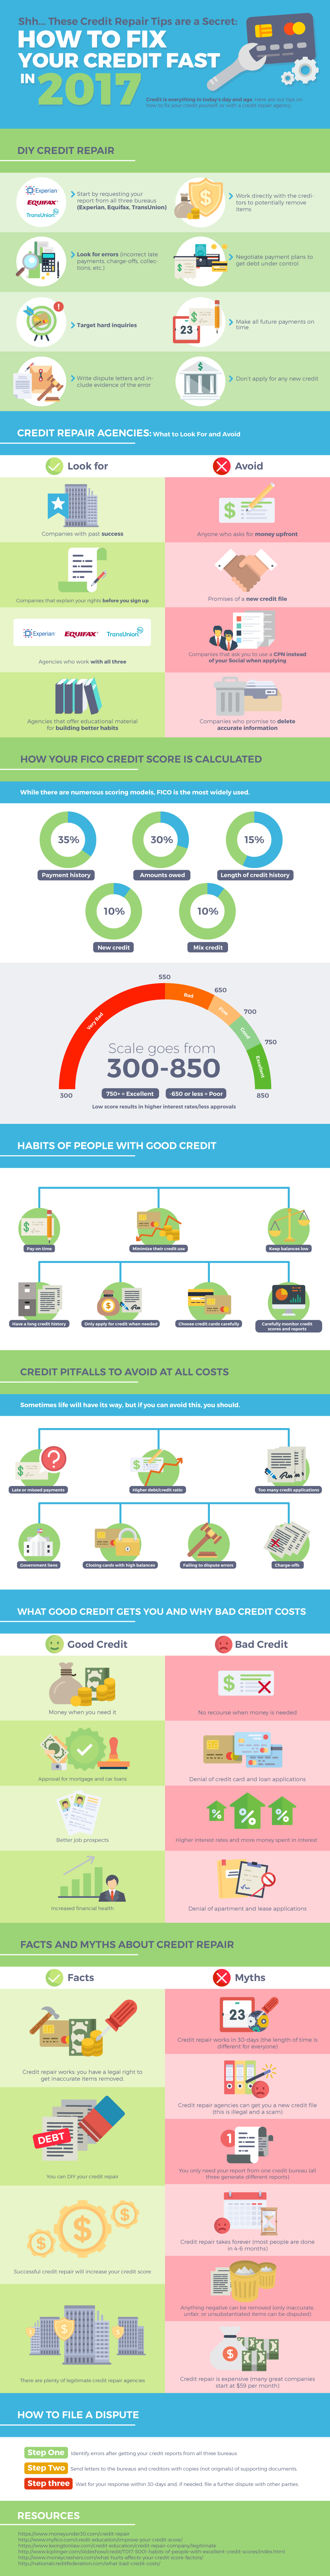 how to fix your credit infographic